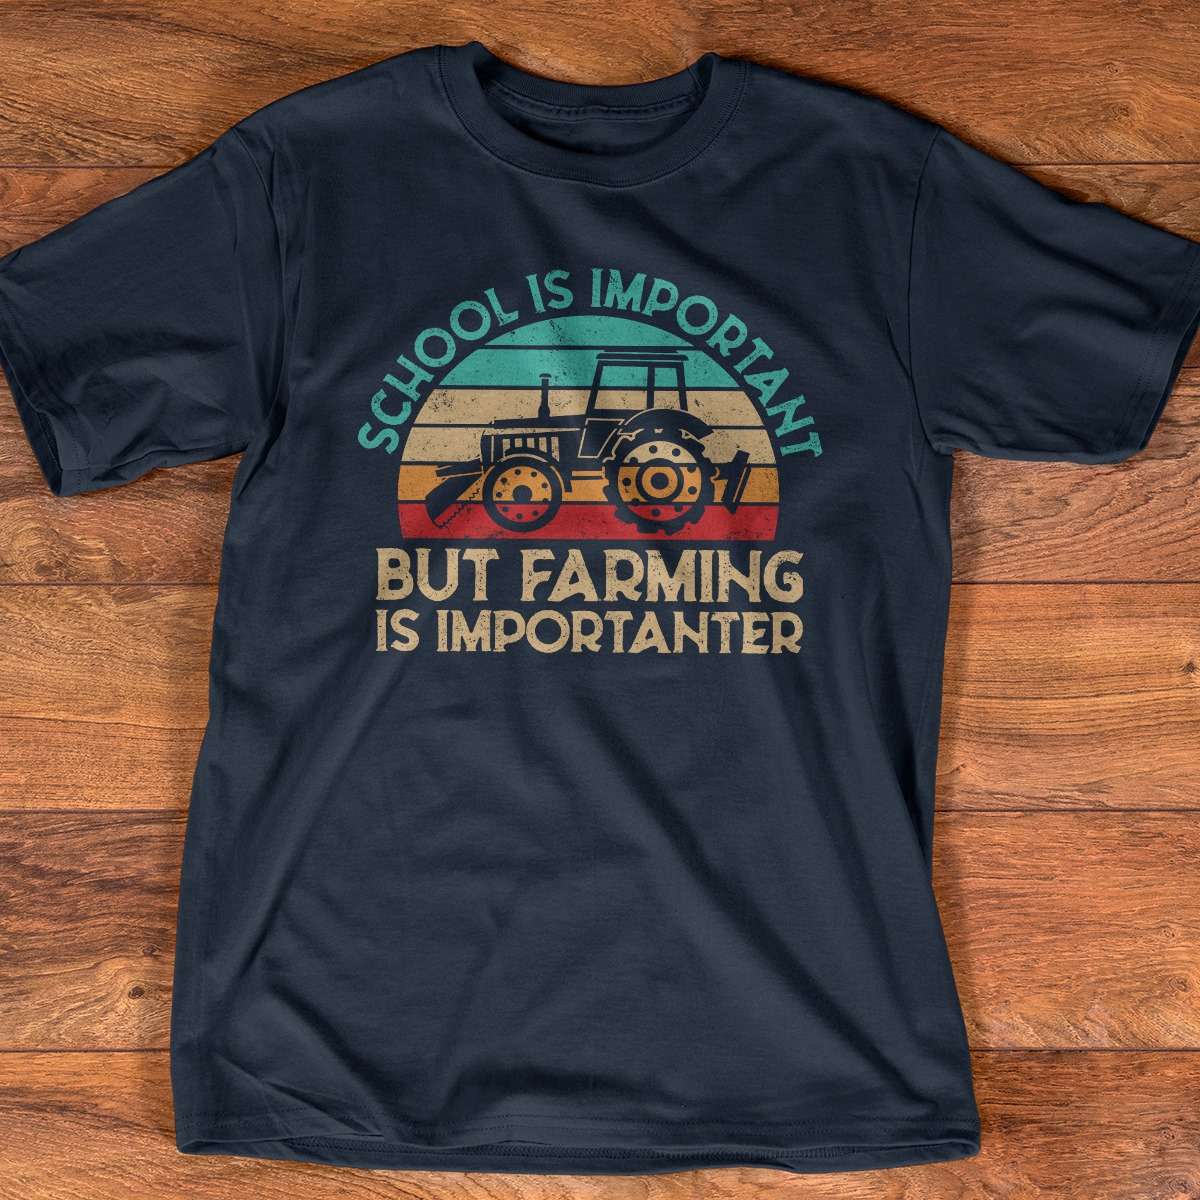 School is important but farming is portanter - Farmer and tractor